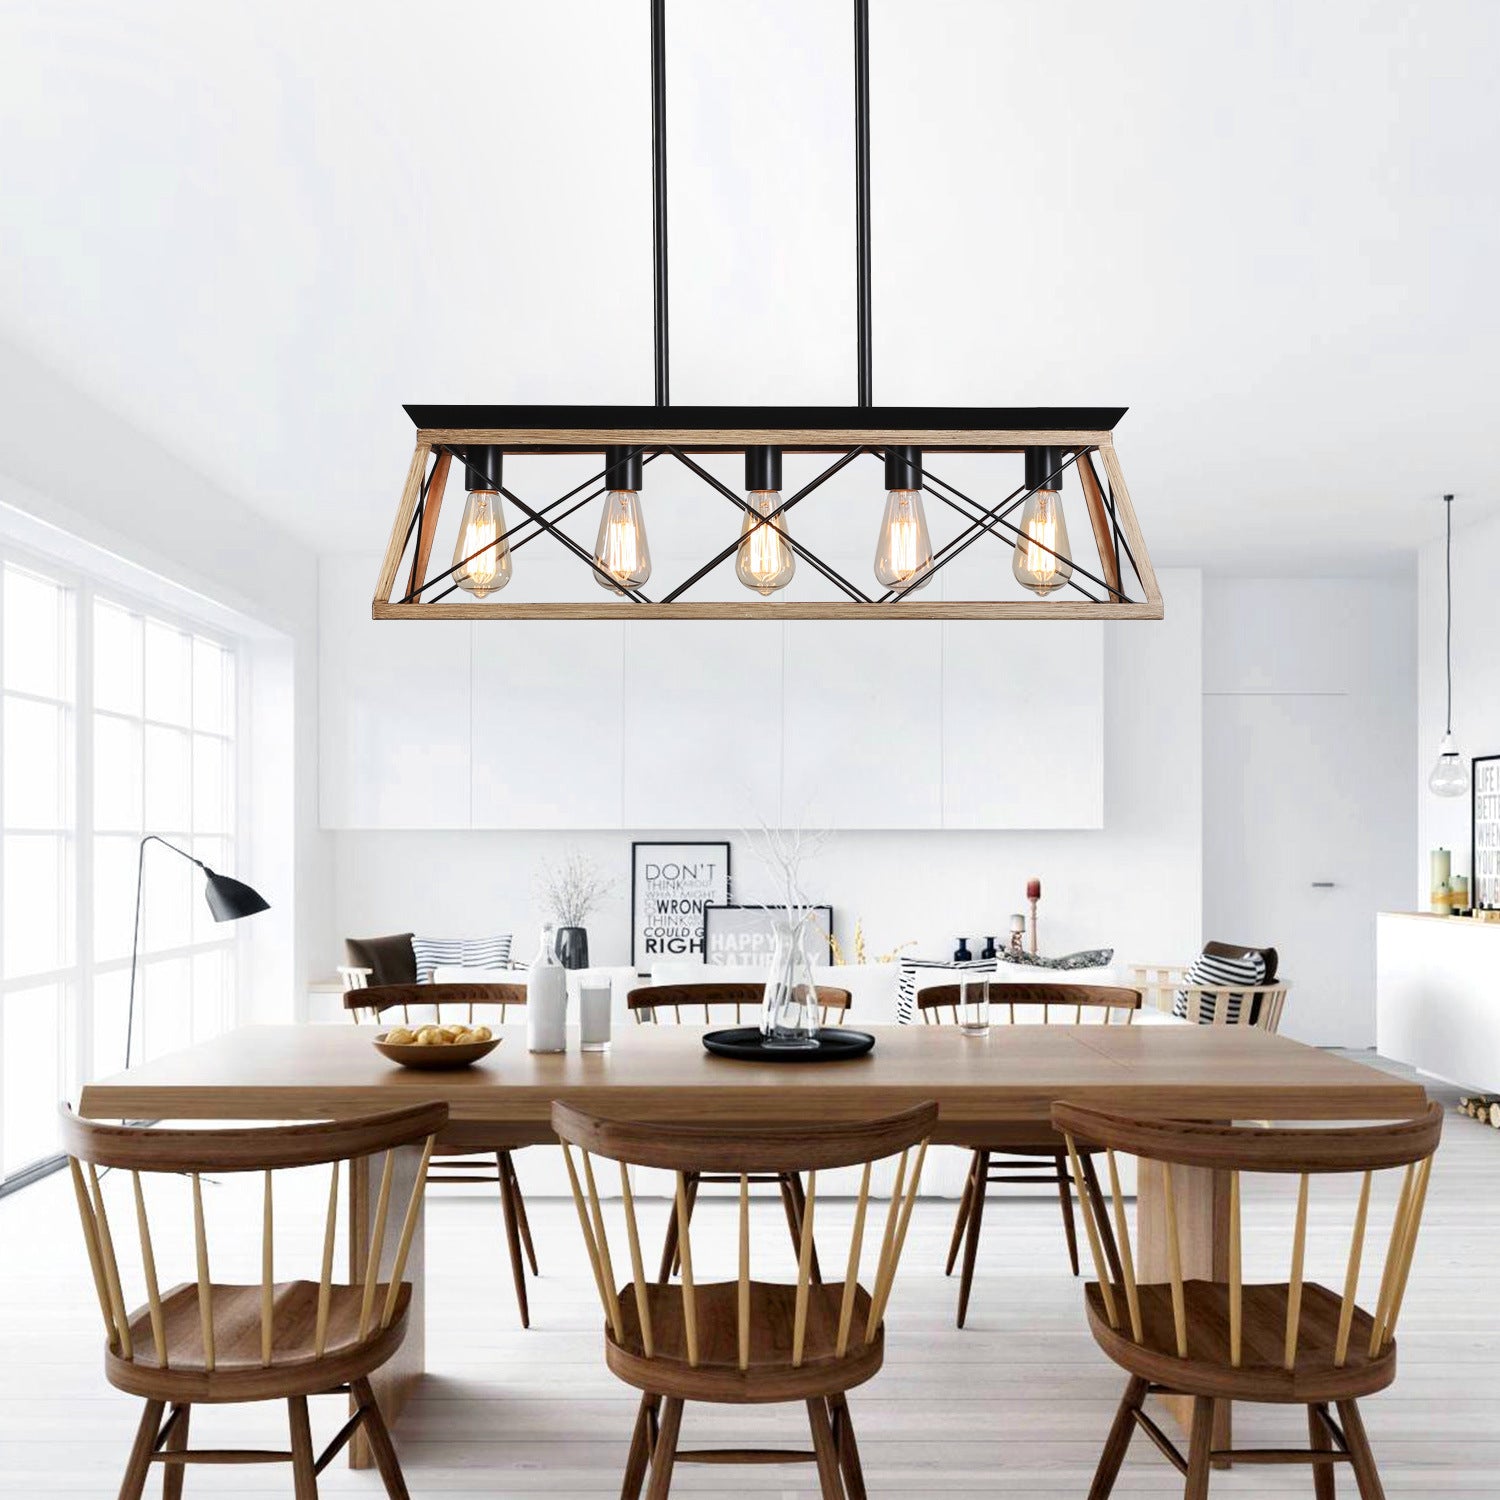 5 Light Farmhouse Chandeliers For Dining Room